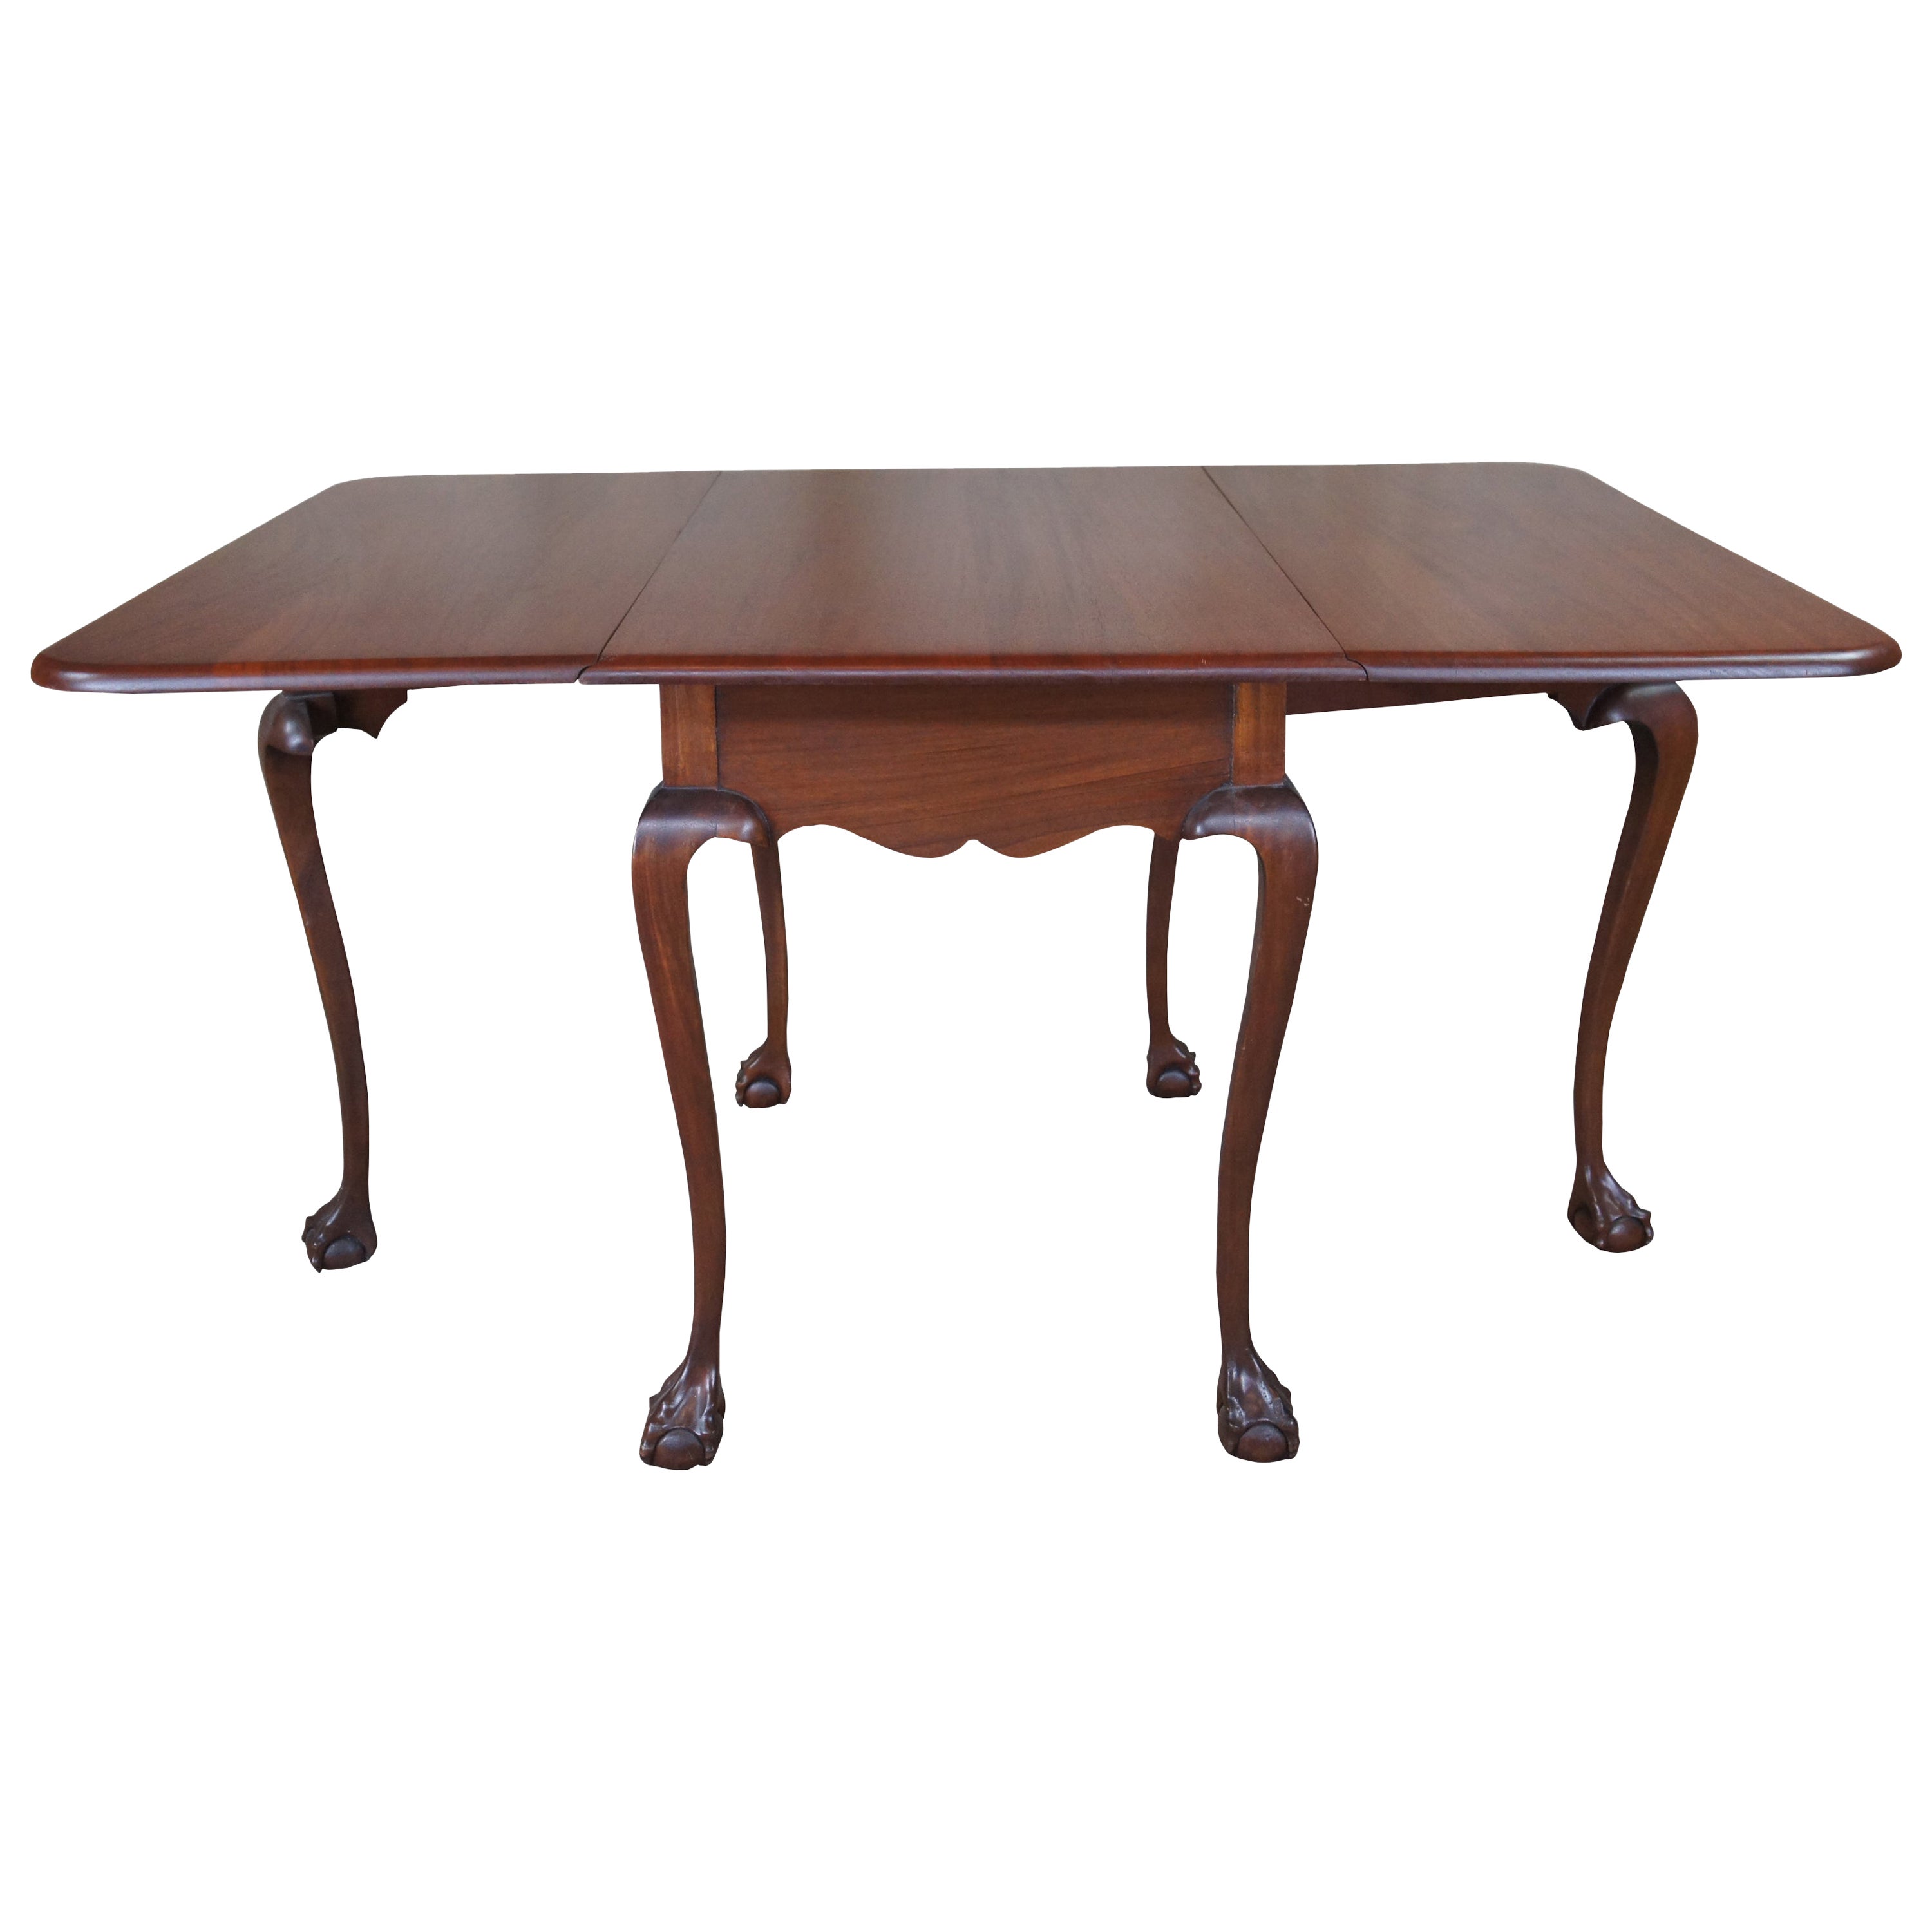 20th Century Chippendale Mahogany Ball & Claw Drop Leaf Gateleg Dining Table